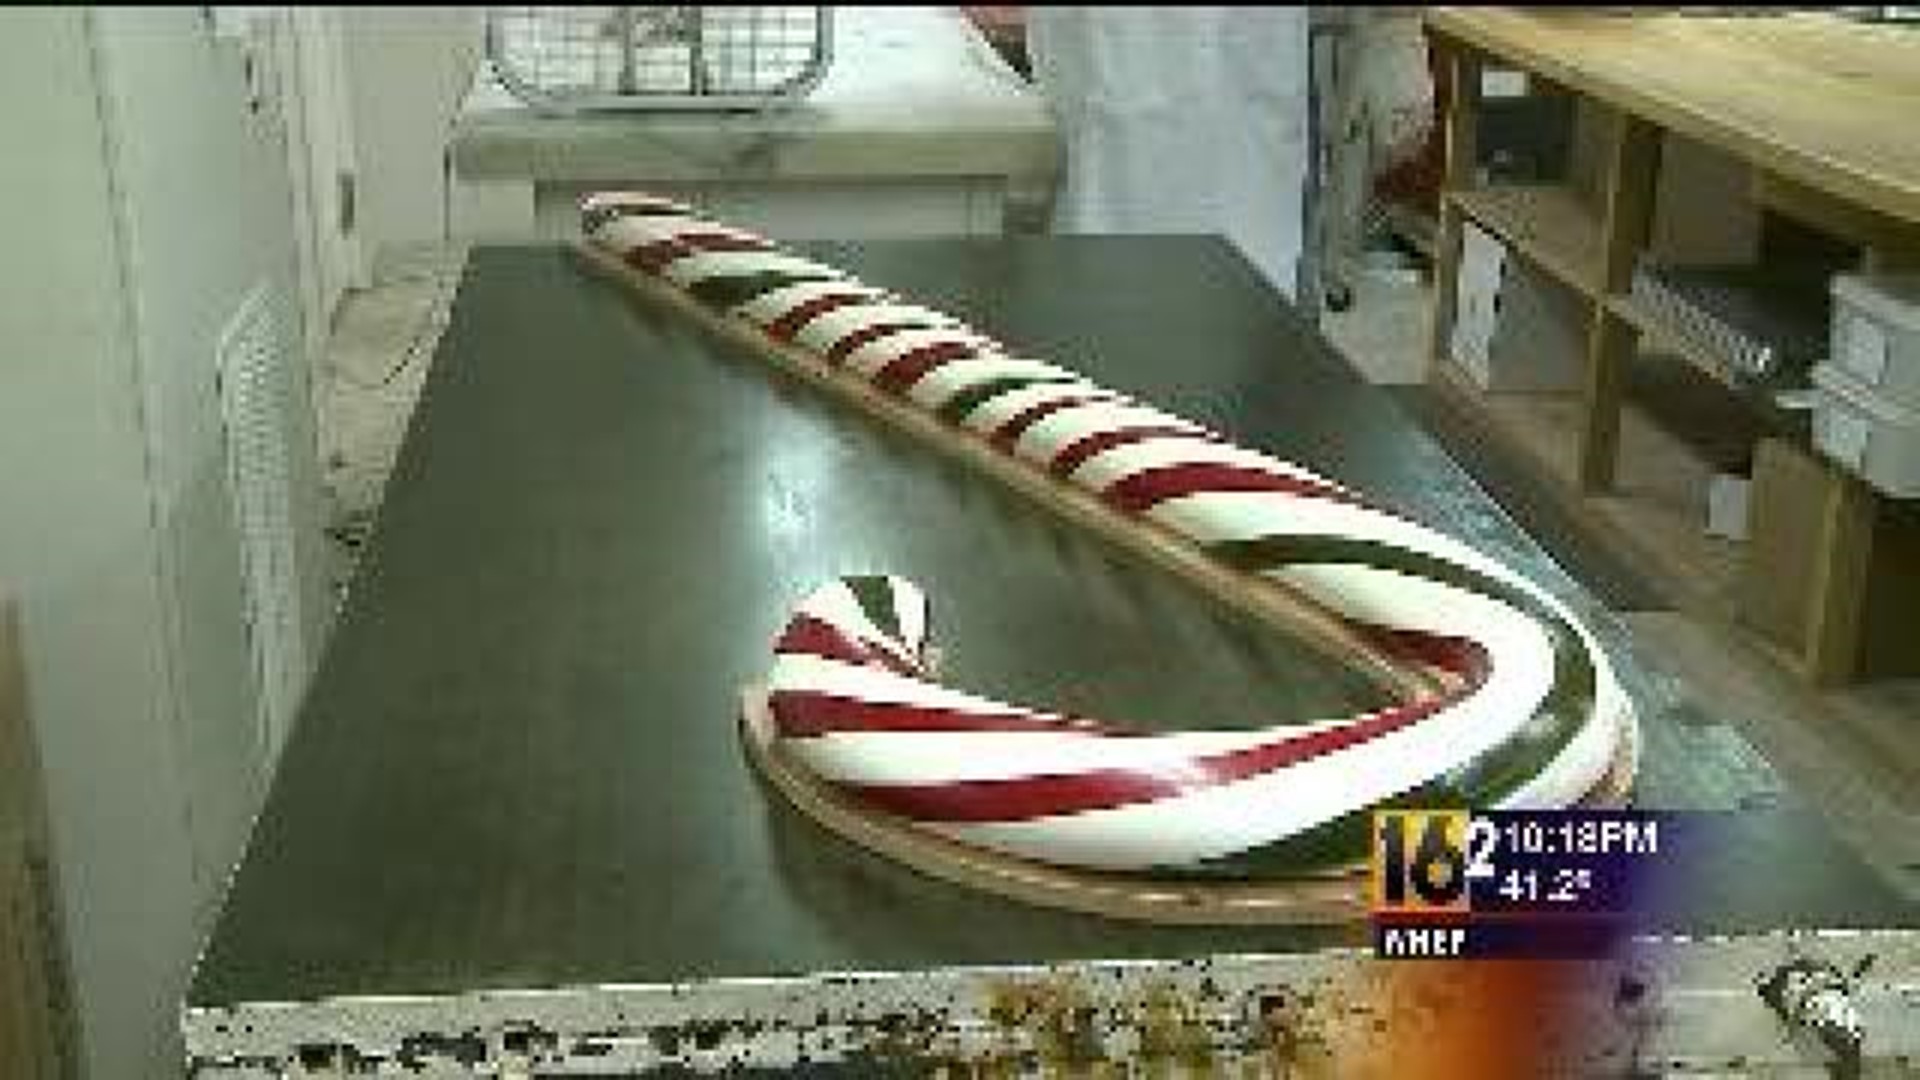 Union County’s Sweetest Treat, A Giant Candy Cane